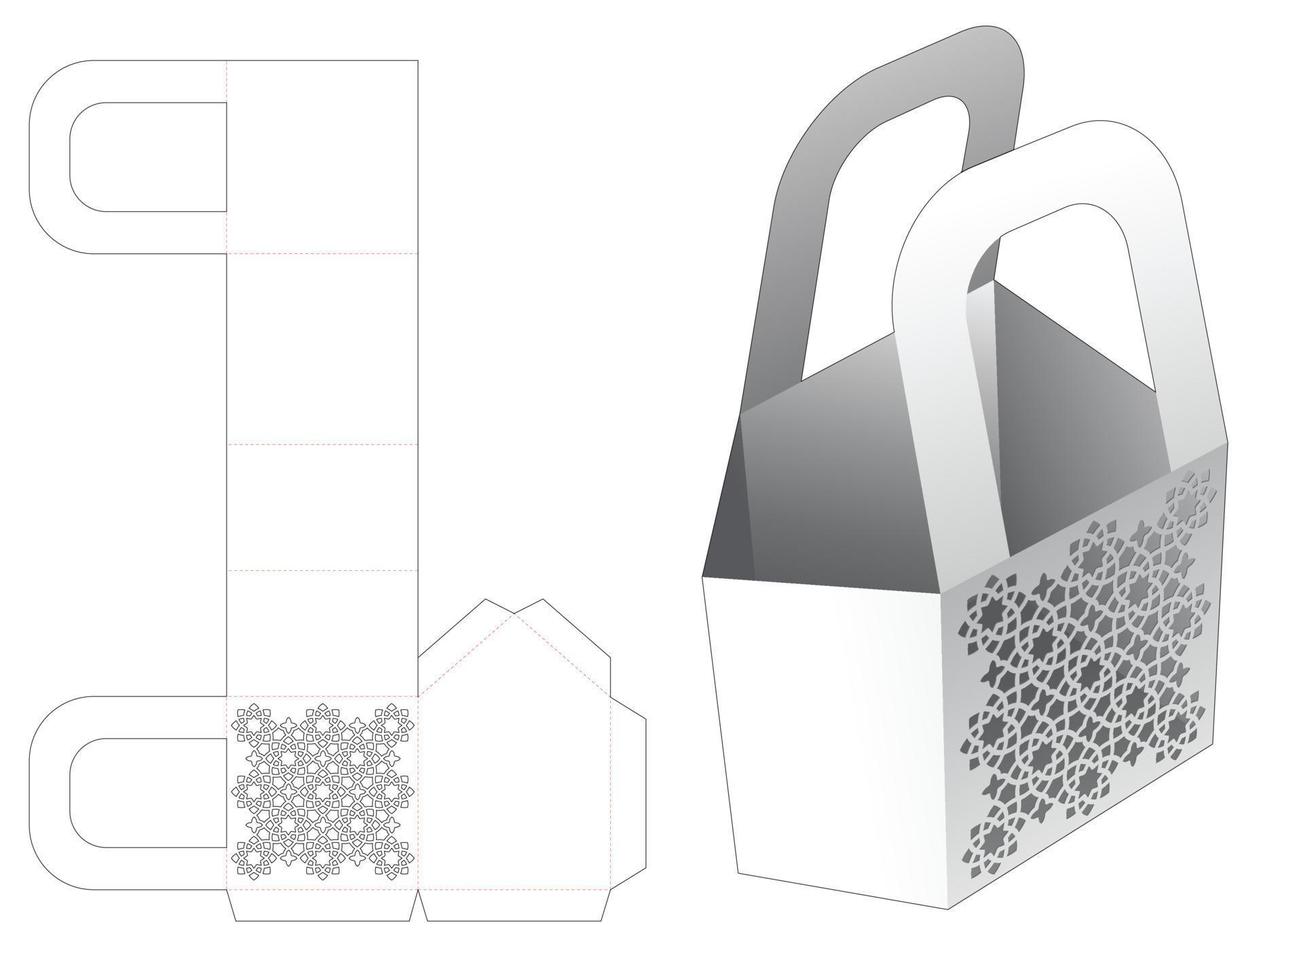 Handle chamfered bag with stenciled pattern die cut template and 3D mockup vector